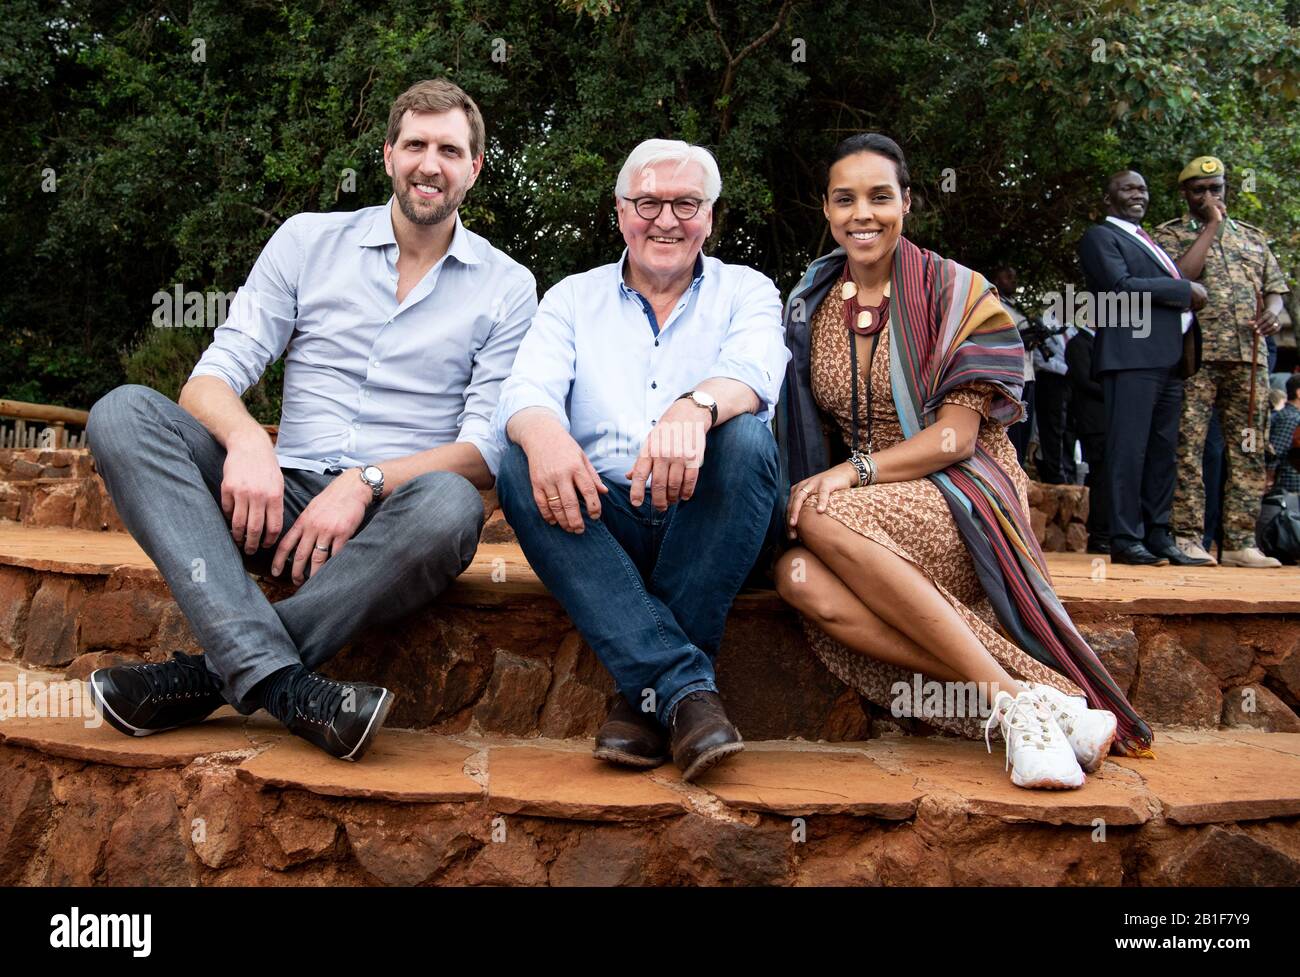 Dirk nowitzki and wife hi-res stock photography and images - Alamy